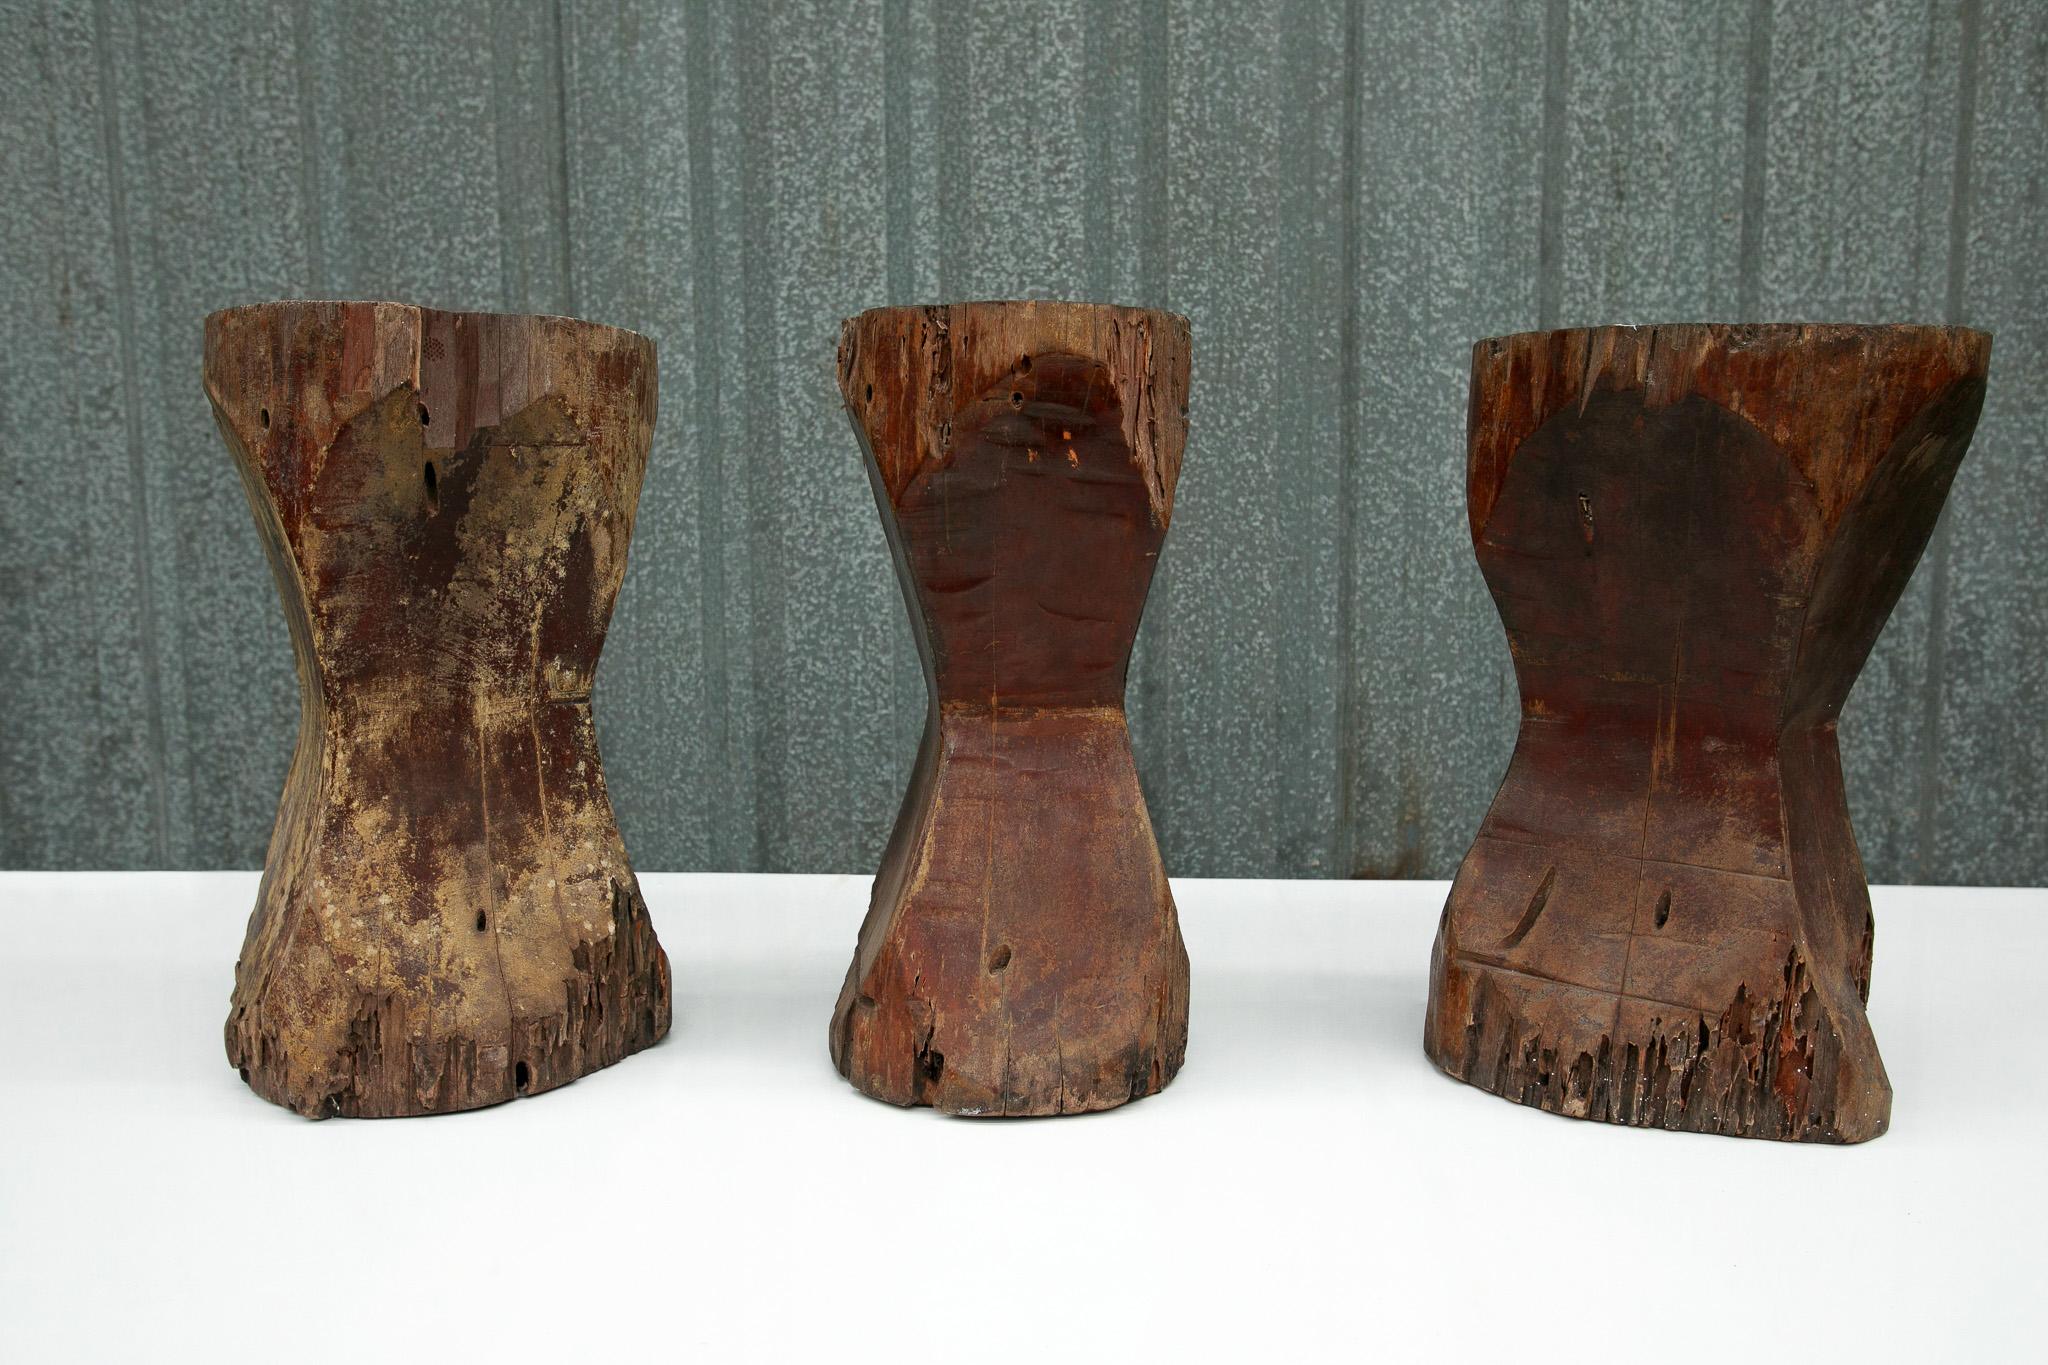 This beautiful set of three Brazilian modern stools was designed by Jose Zanine Caldas in the seventies. The stools are completely made out of Pequi hardwood and the top and bottom are flat, while the middle section is carved in. These wooden stools